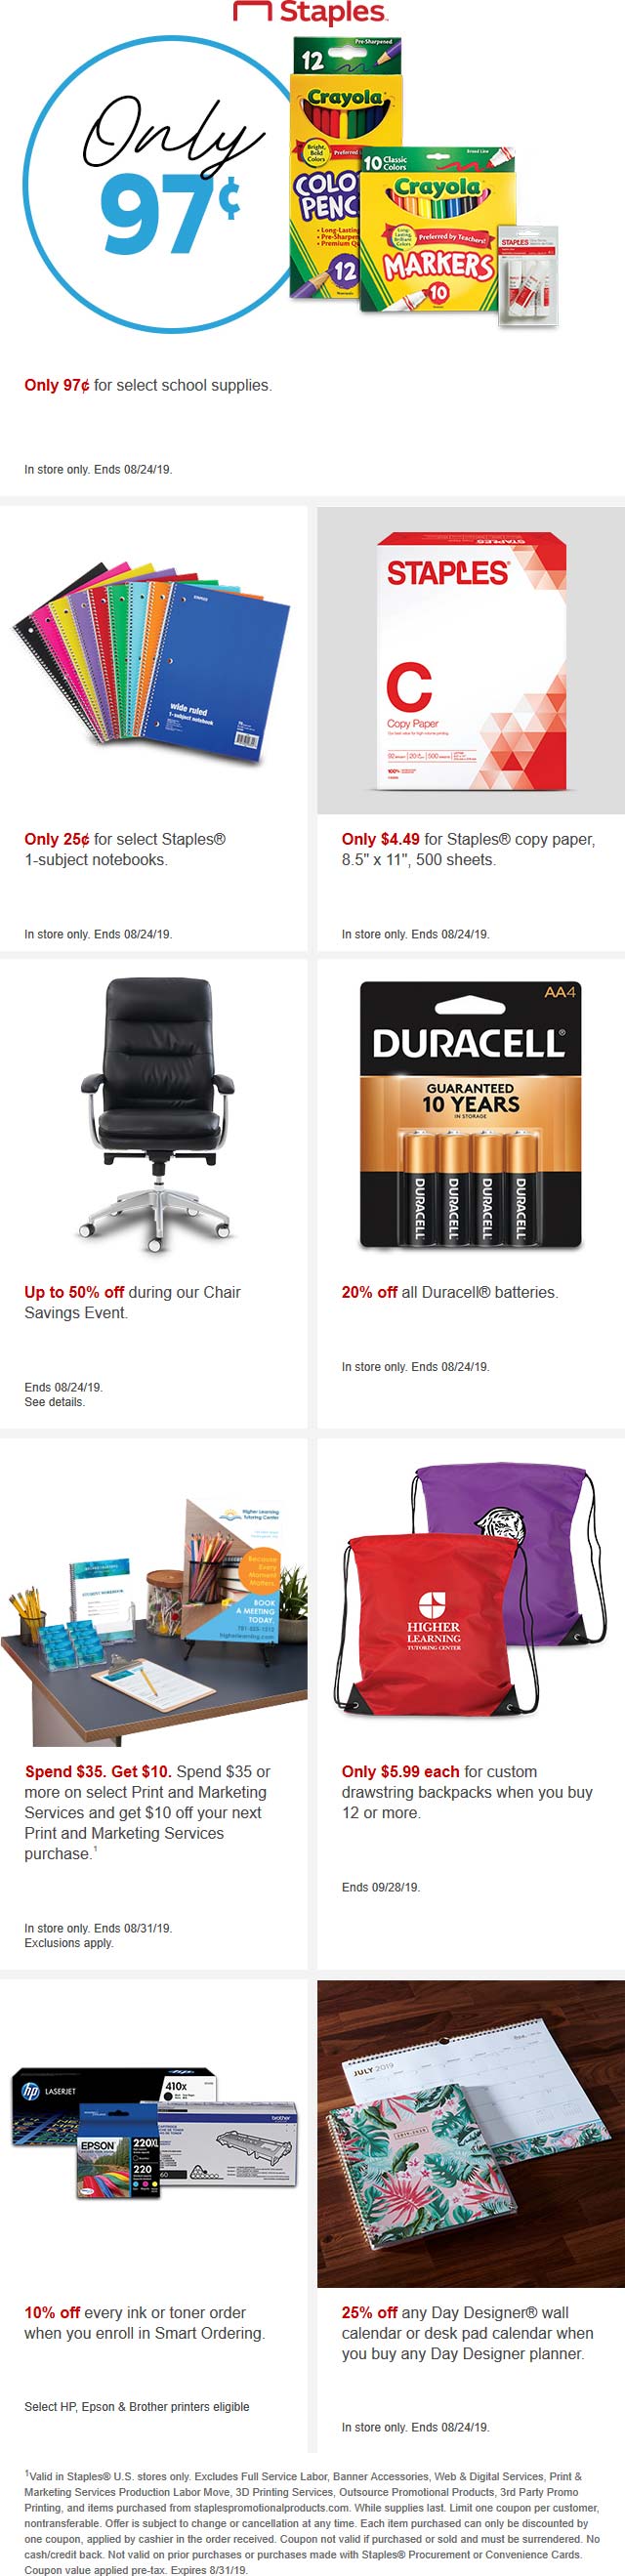 Staples coupons & promo code for [May 2022]